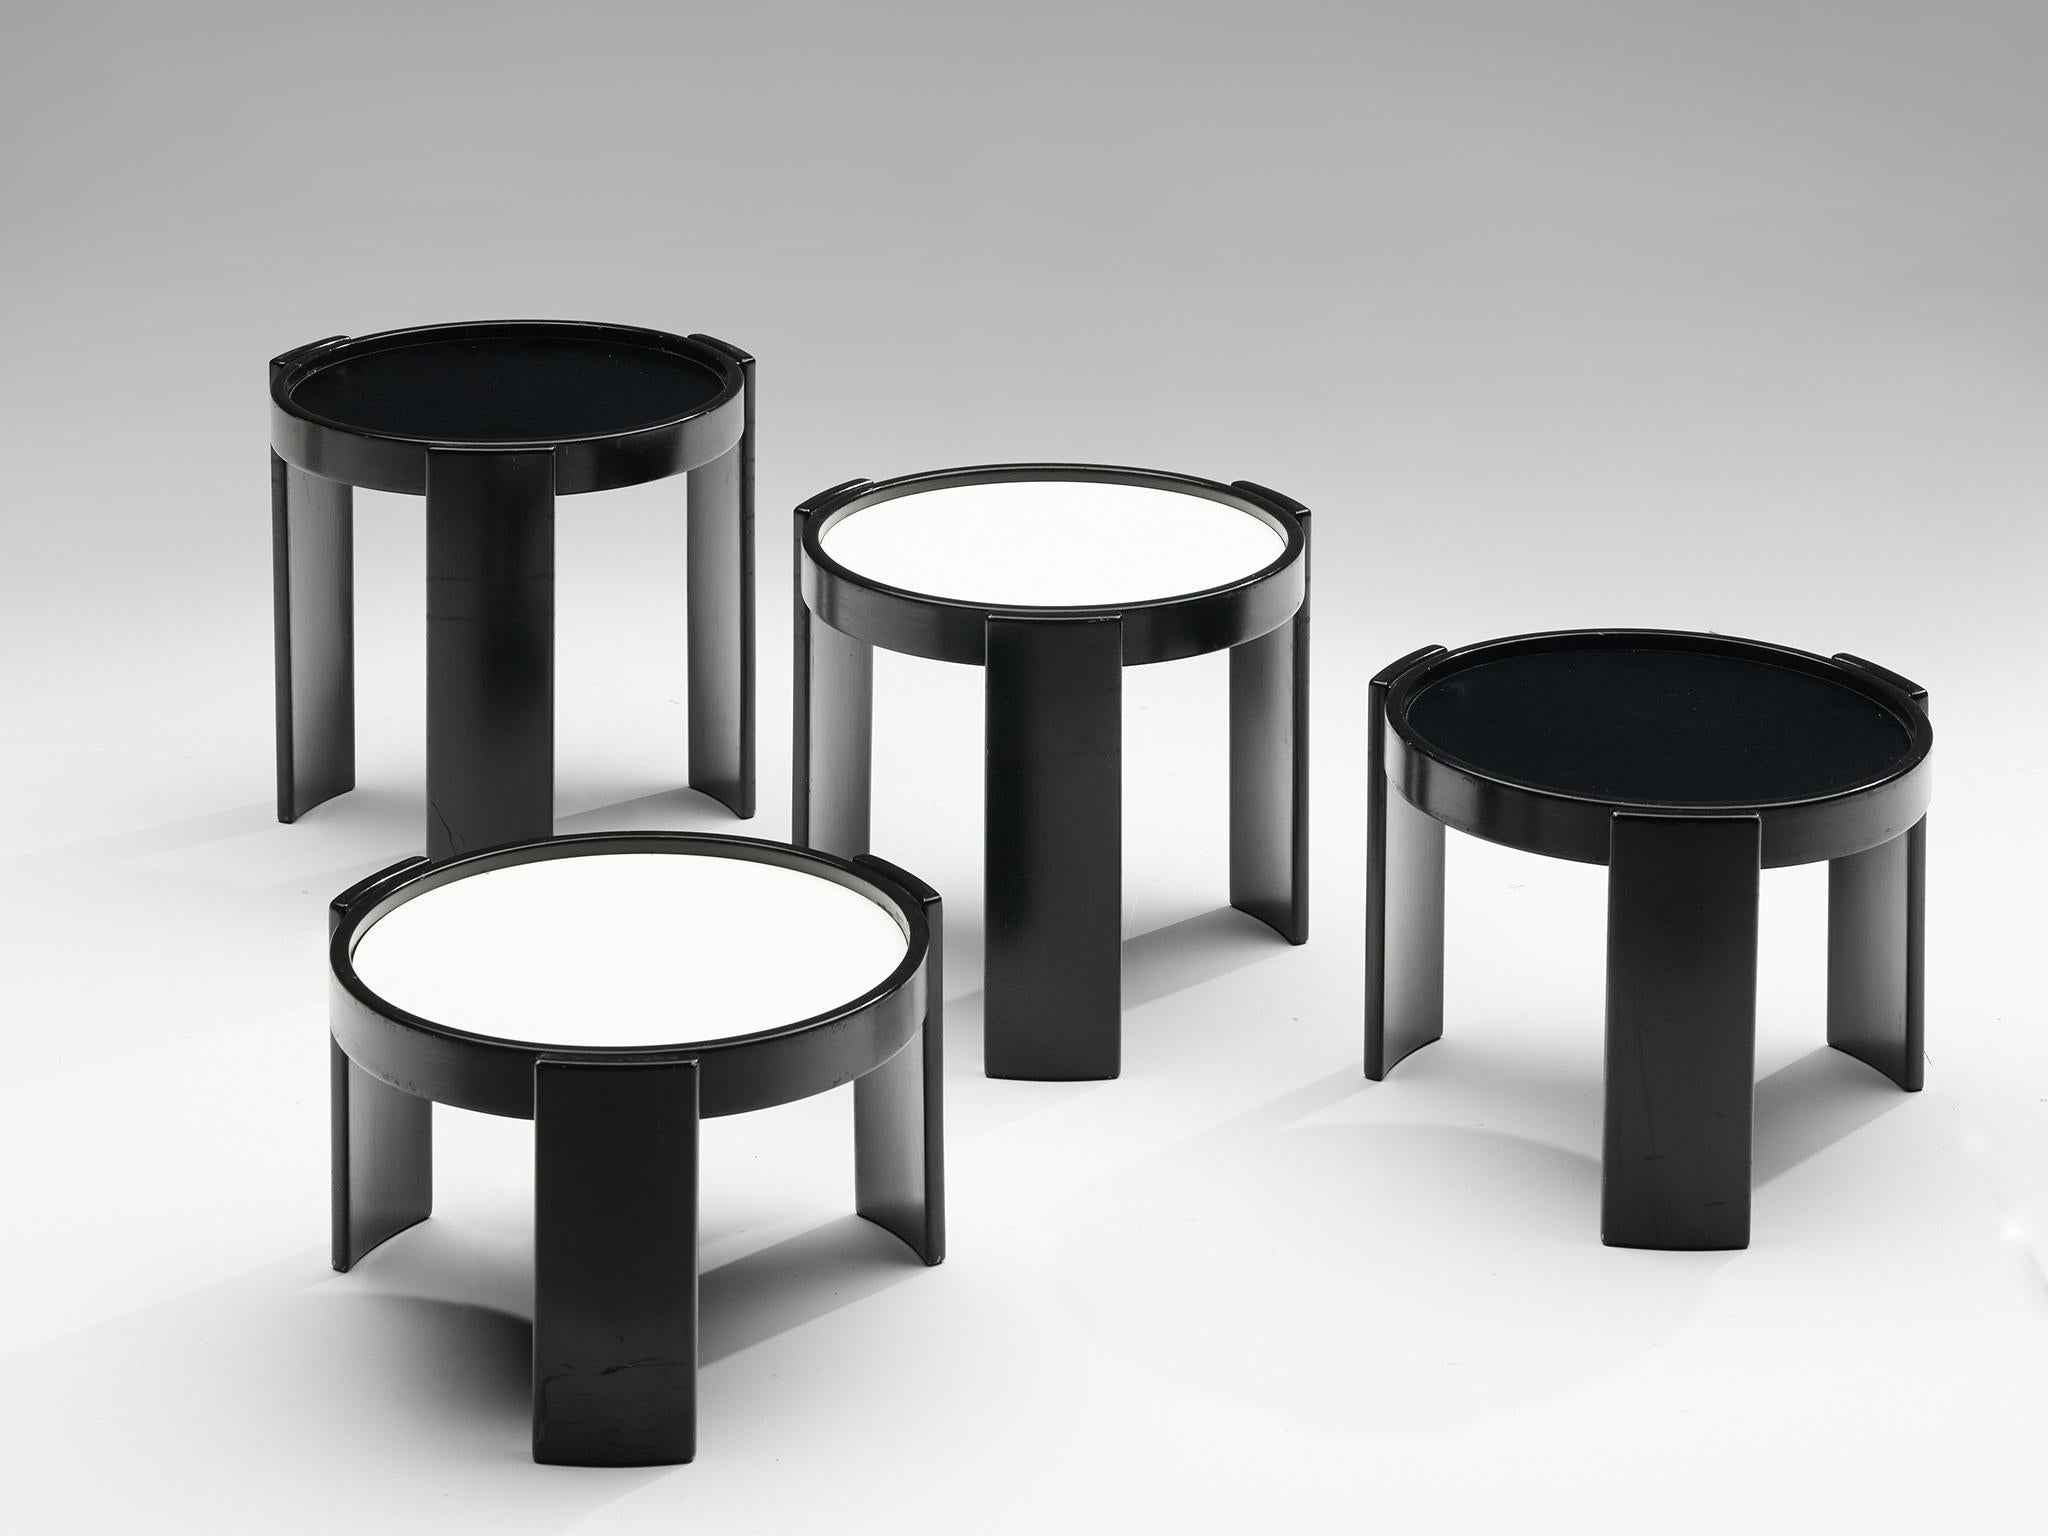 Gianfranco Frattini for Cassina, nesting table, black and white lacquered wood, Italy, 1960s

Nesting tables, consisting of four pieces, designed by Gianfranco Frattini for Cassina. All the tables are black lacquered wood with a reversible white and